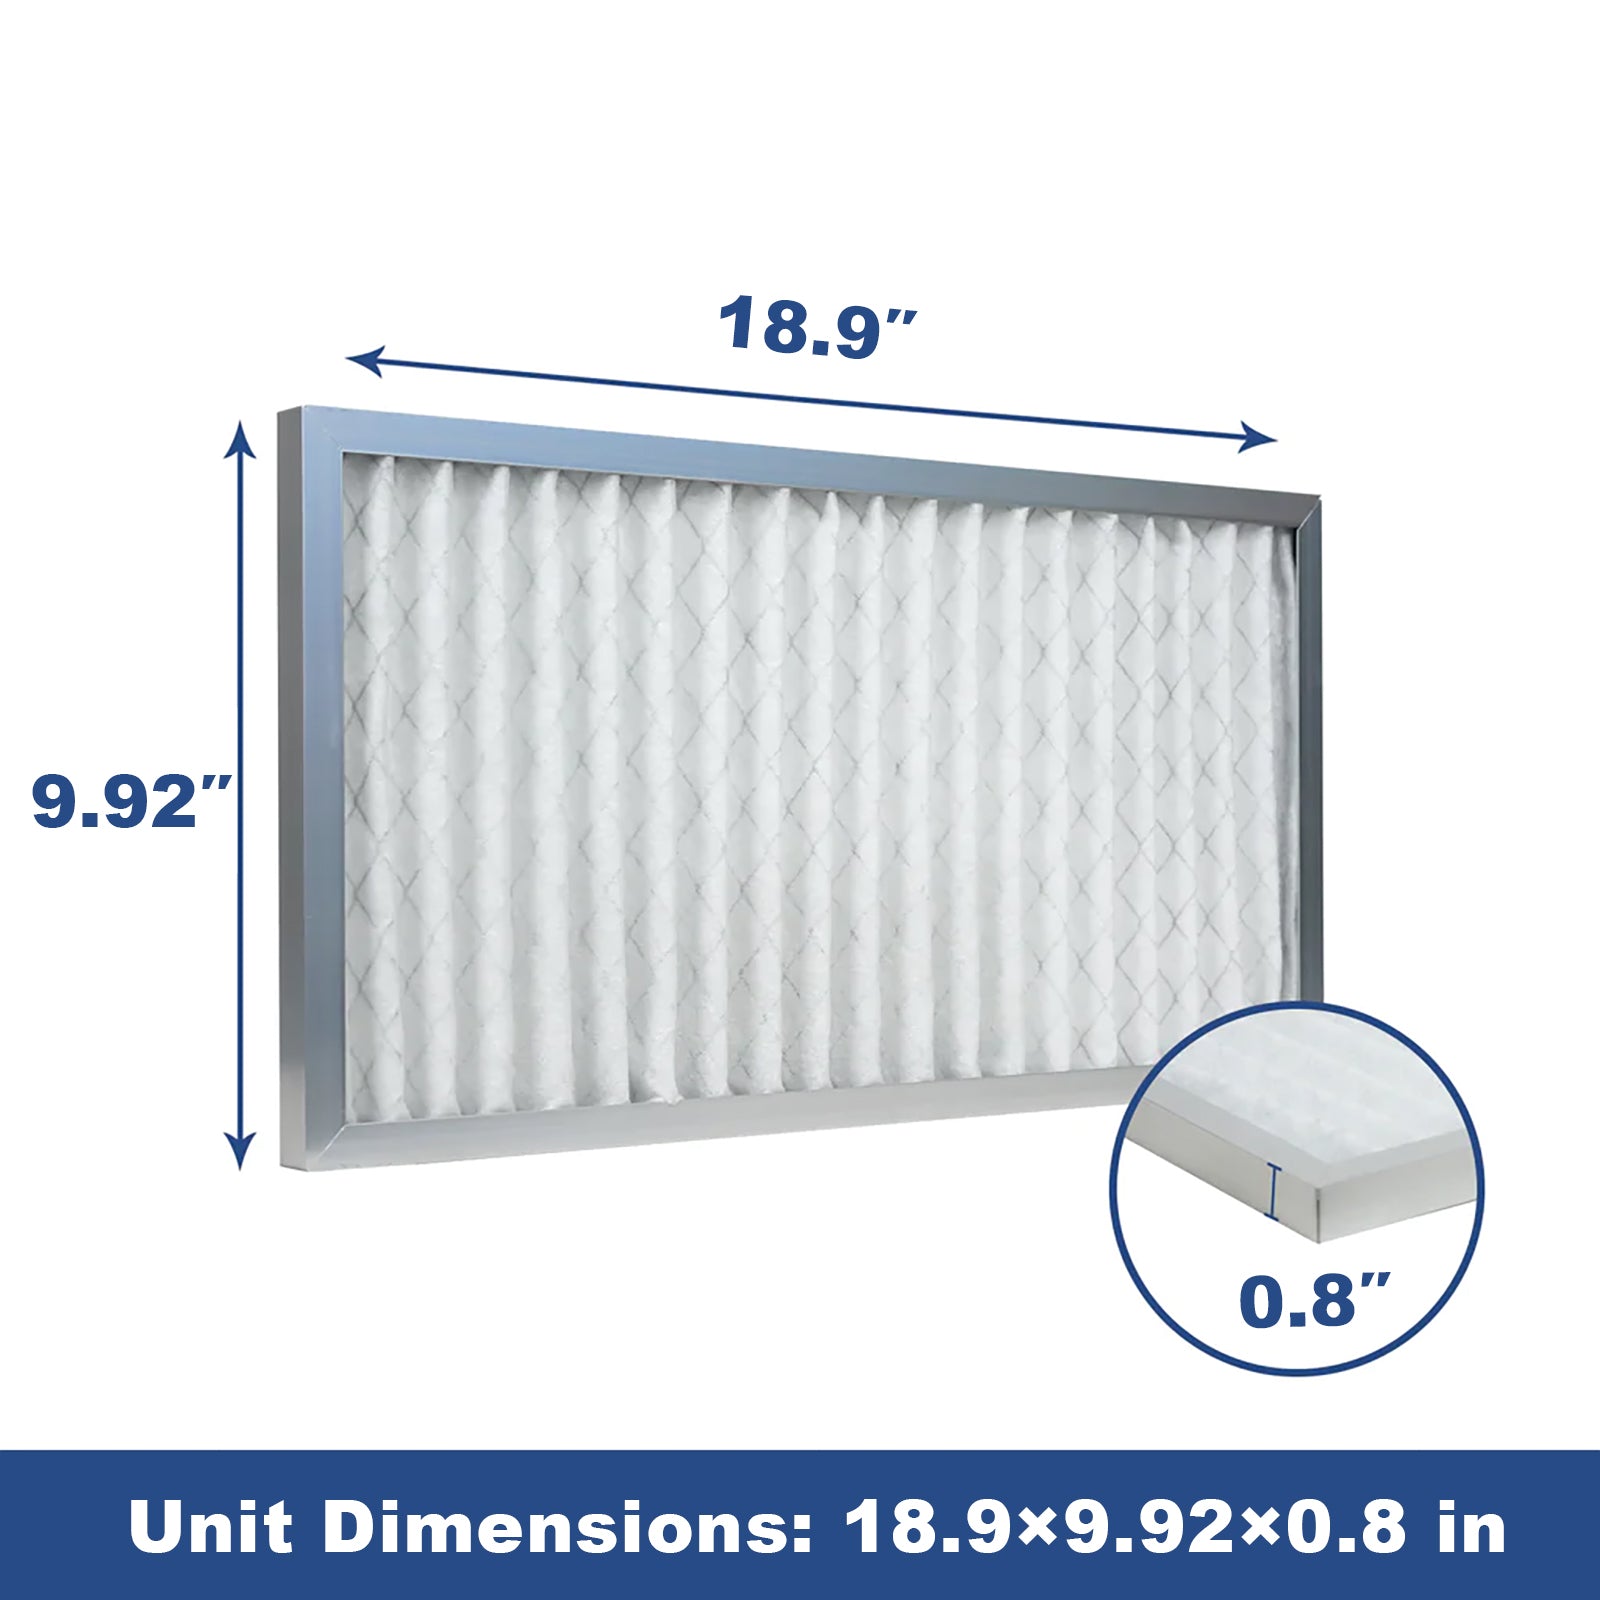 AlorAir 2-Pack MERV-10 Filters with 18.9"x9.92"x0.8" dimensions for Storm SLGR 1600X Commericial Dehumidifiers